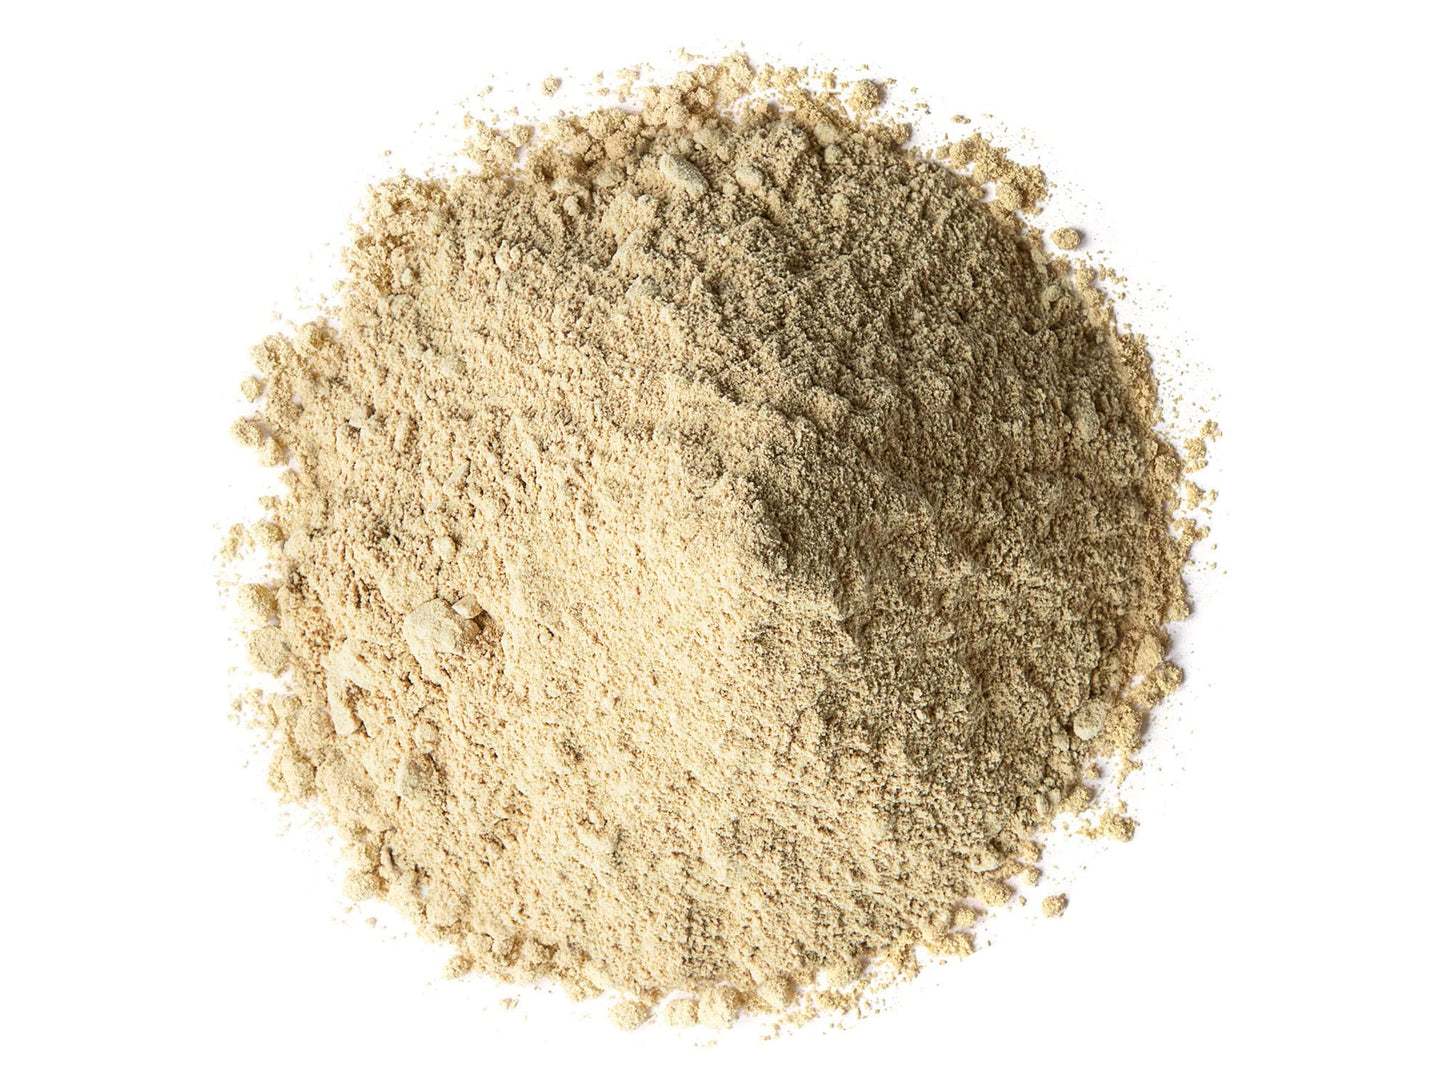 Black Maca Powder - Finely Ground Raw Dried Root, Kosher, Vegan, Non-Gelatinized Powder. Energizing Superfood Supplement. Perfect for Smoothies, Granola, Oats, and Drinks. Bulk